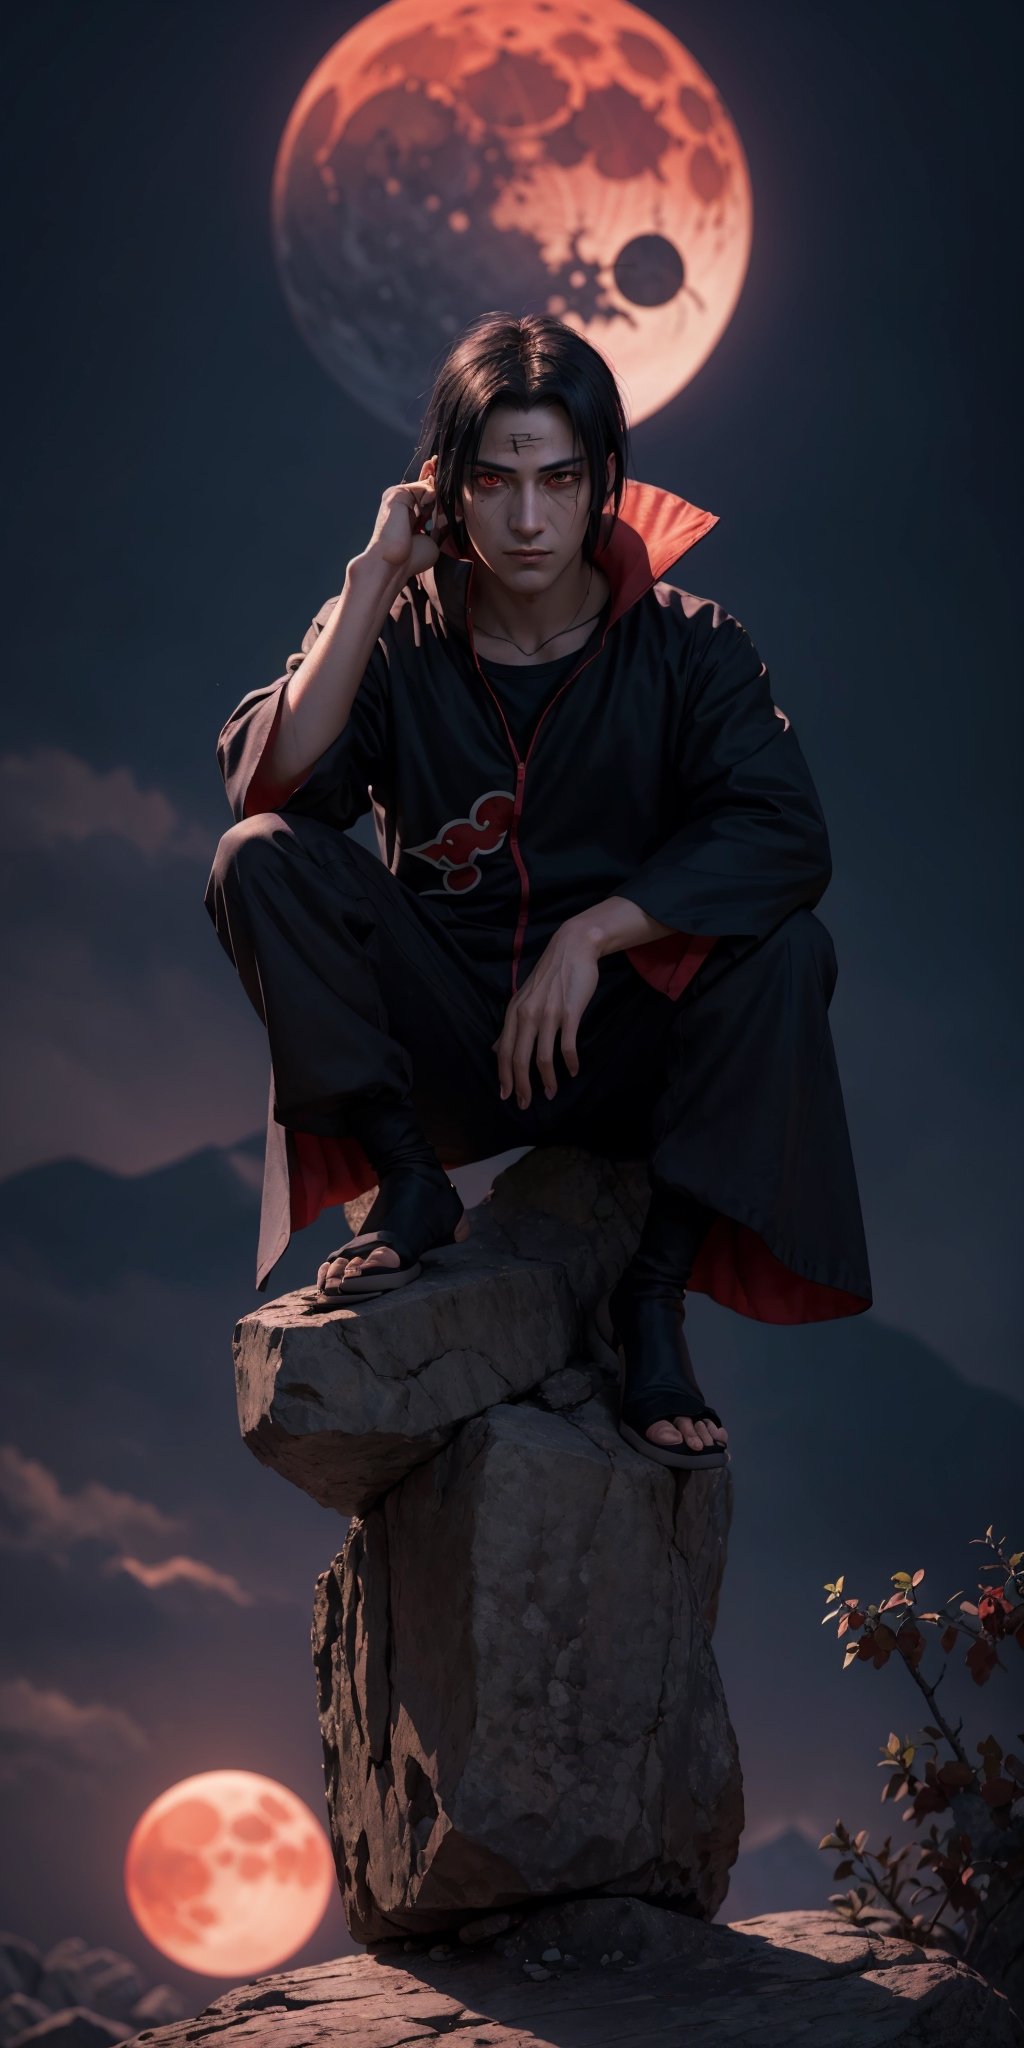 Visualize a mesmerizing scene featuring Itachi Uchiha seated stylishly on a rock against a night backdrop with a red moon. Request a 32k Ultra HDR high-quality image masterpiece, highlighting the cool and iconic essence of Itachi. Emphasize meticulous details in his posture, surroundings, and a crow perched on his shoulder. Aim for perfection in his high detailed face, glowing red eyes, and the overall setting, creating a visually stunning composition that captures the enigmatic character of Itachi Uchiha in this striking and atmospheric scene.